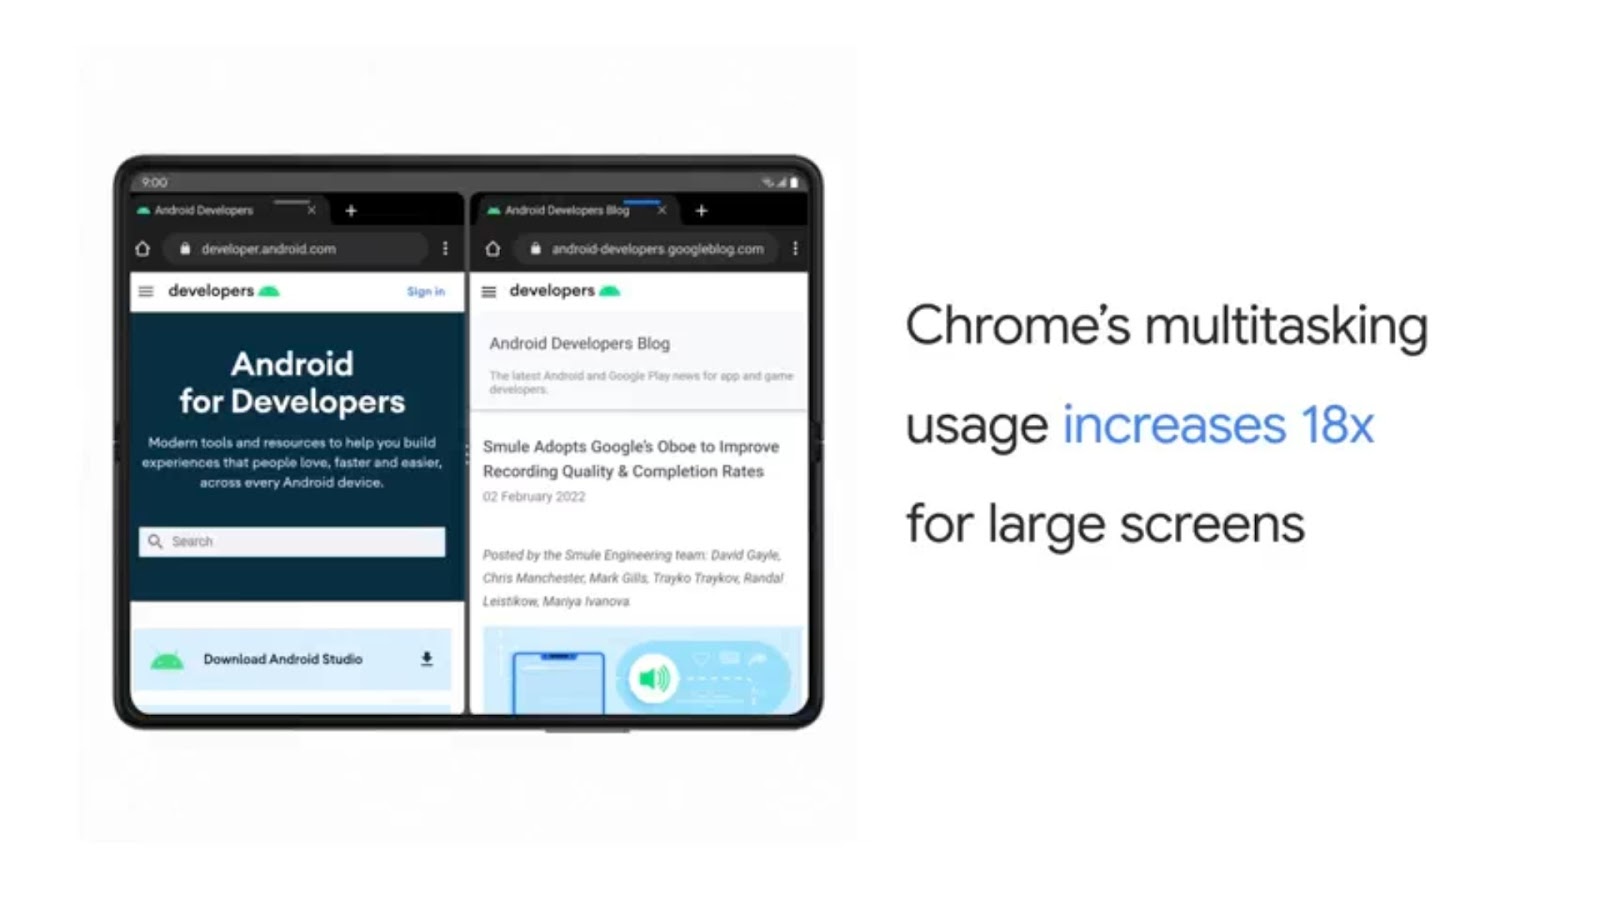 Chrome’s multitasking usage increases 18x on large screens